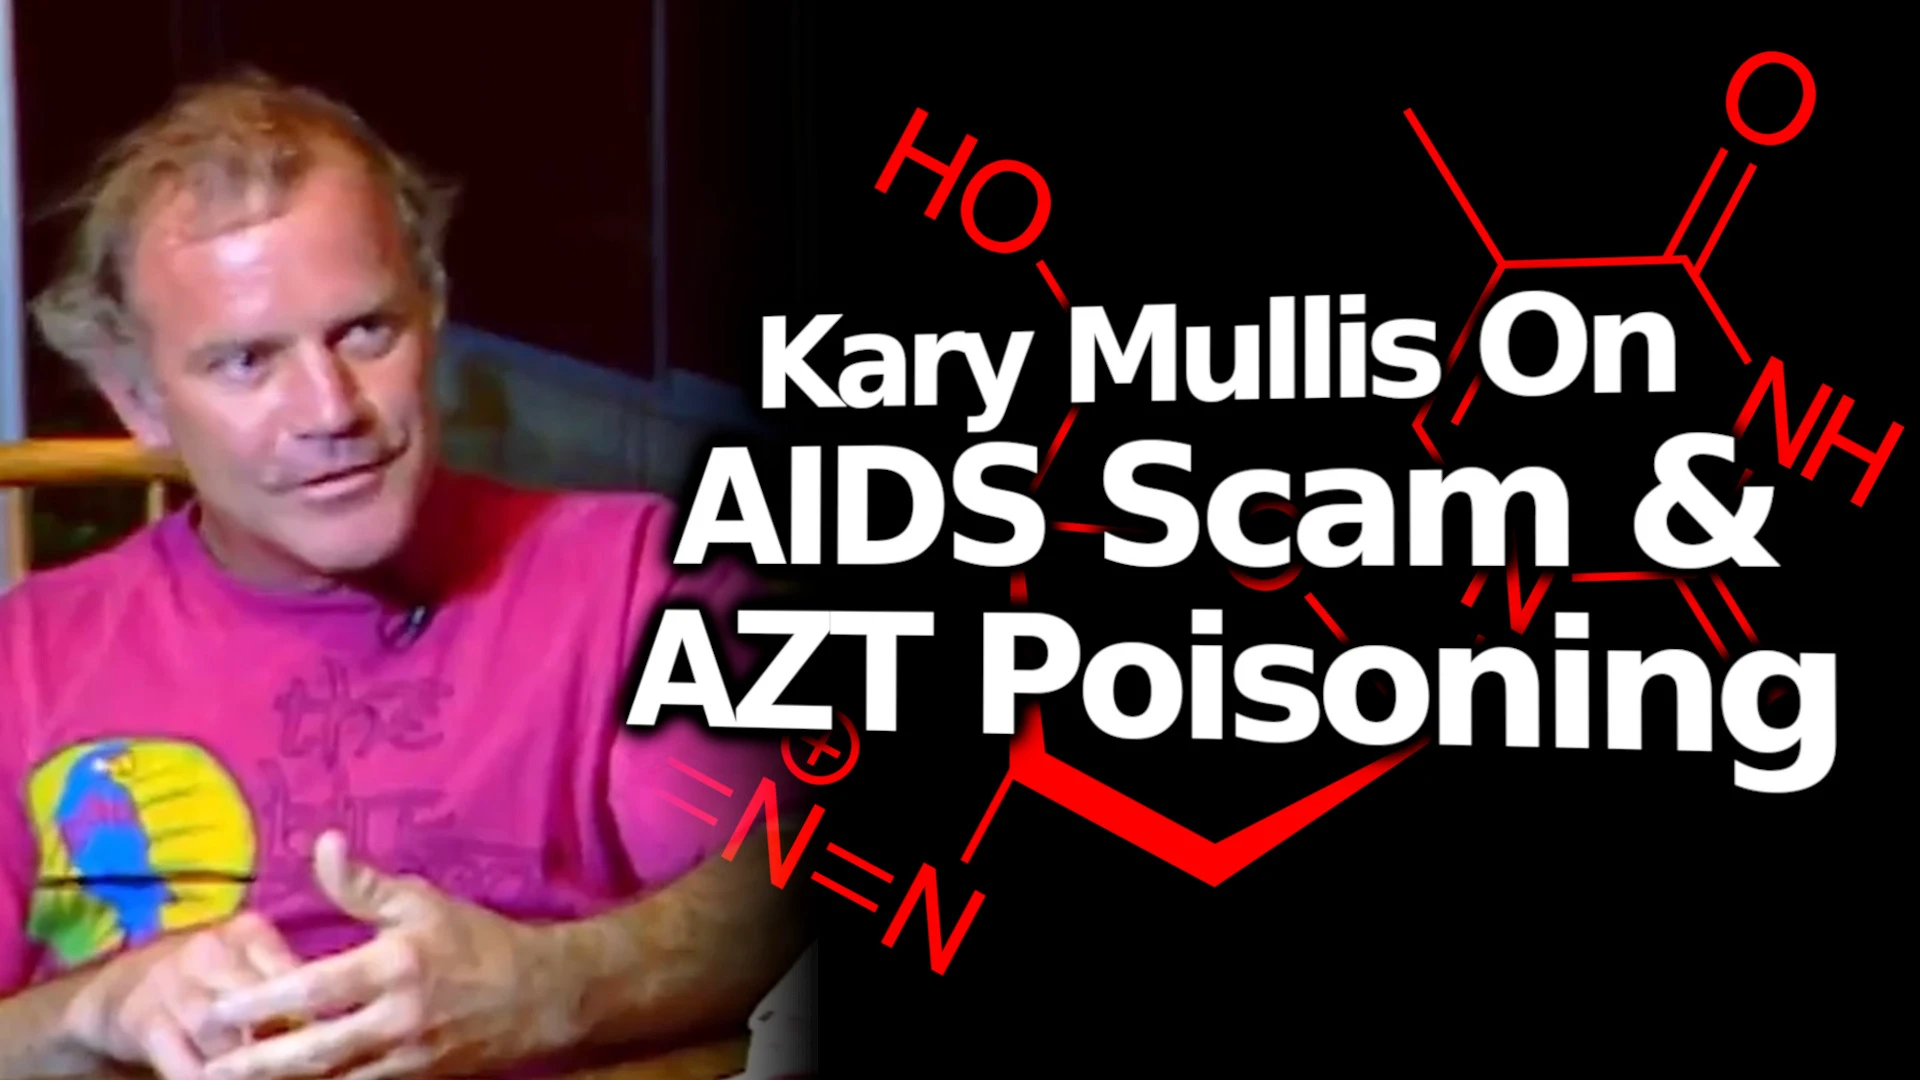 Kary Mullis On The The AIDS Scam & AZT (Zidovudine) Poisoning/ Killing of AIDS Patients